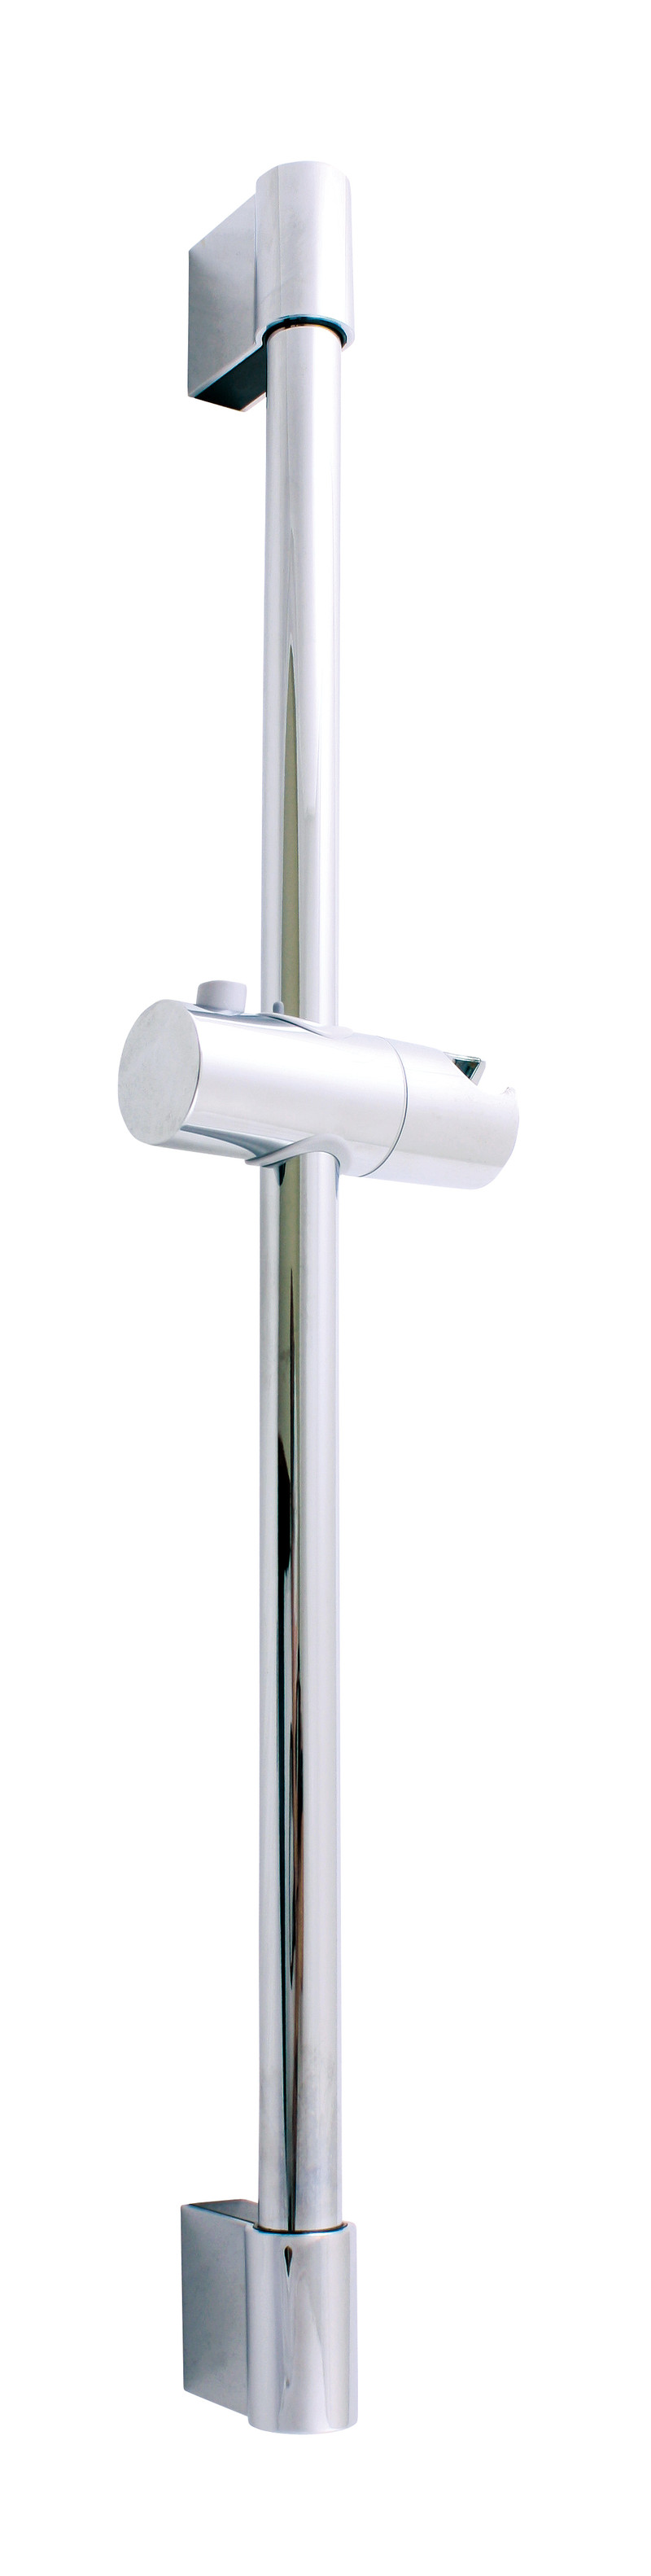 Shower bars with movable holder for hand shower